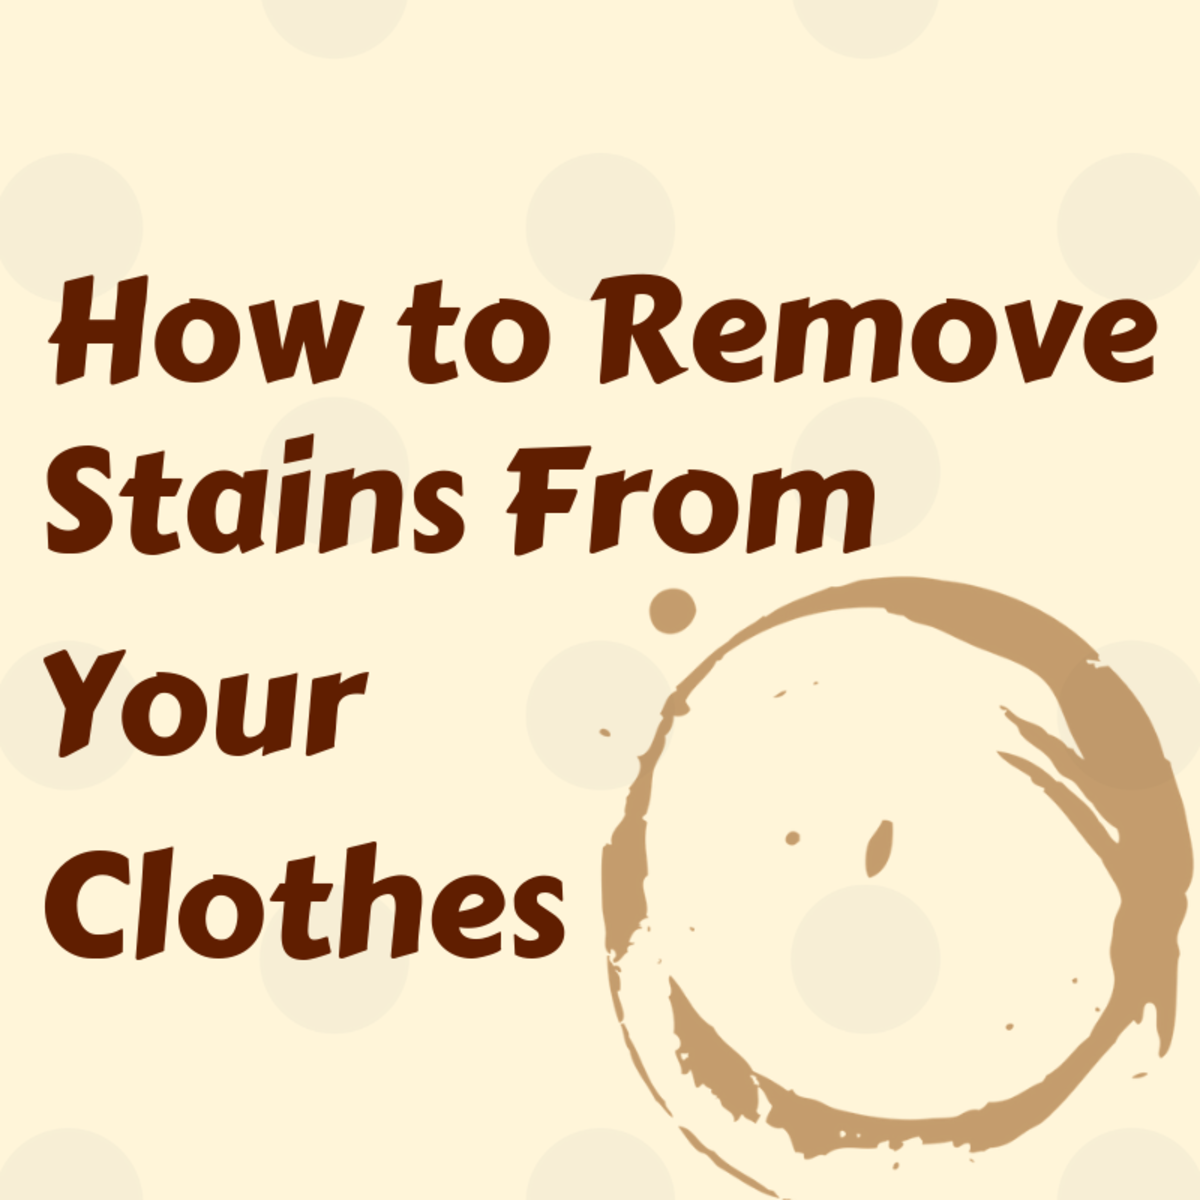 Getting stains off of your clothes doesn't have to be difficult.